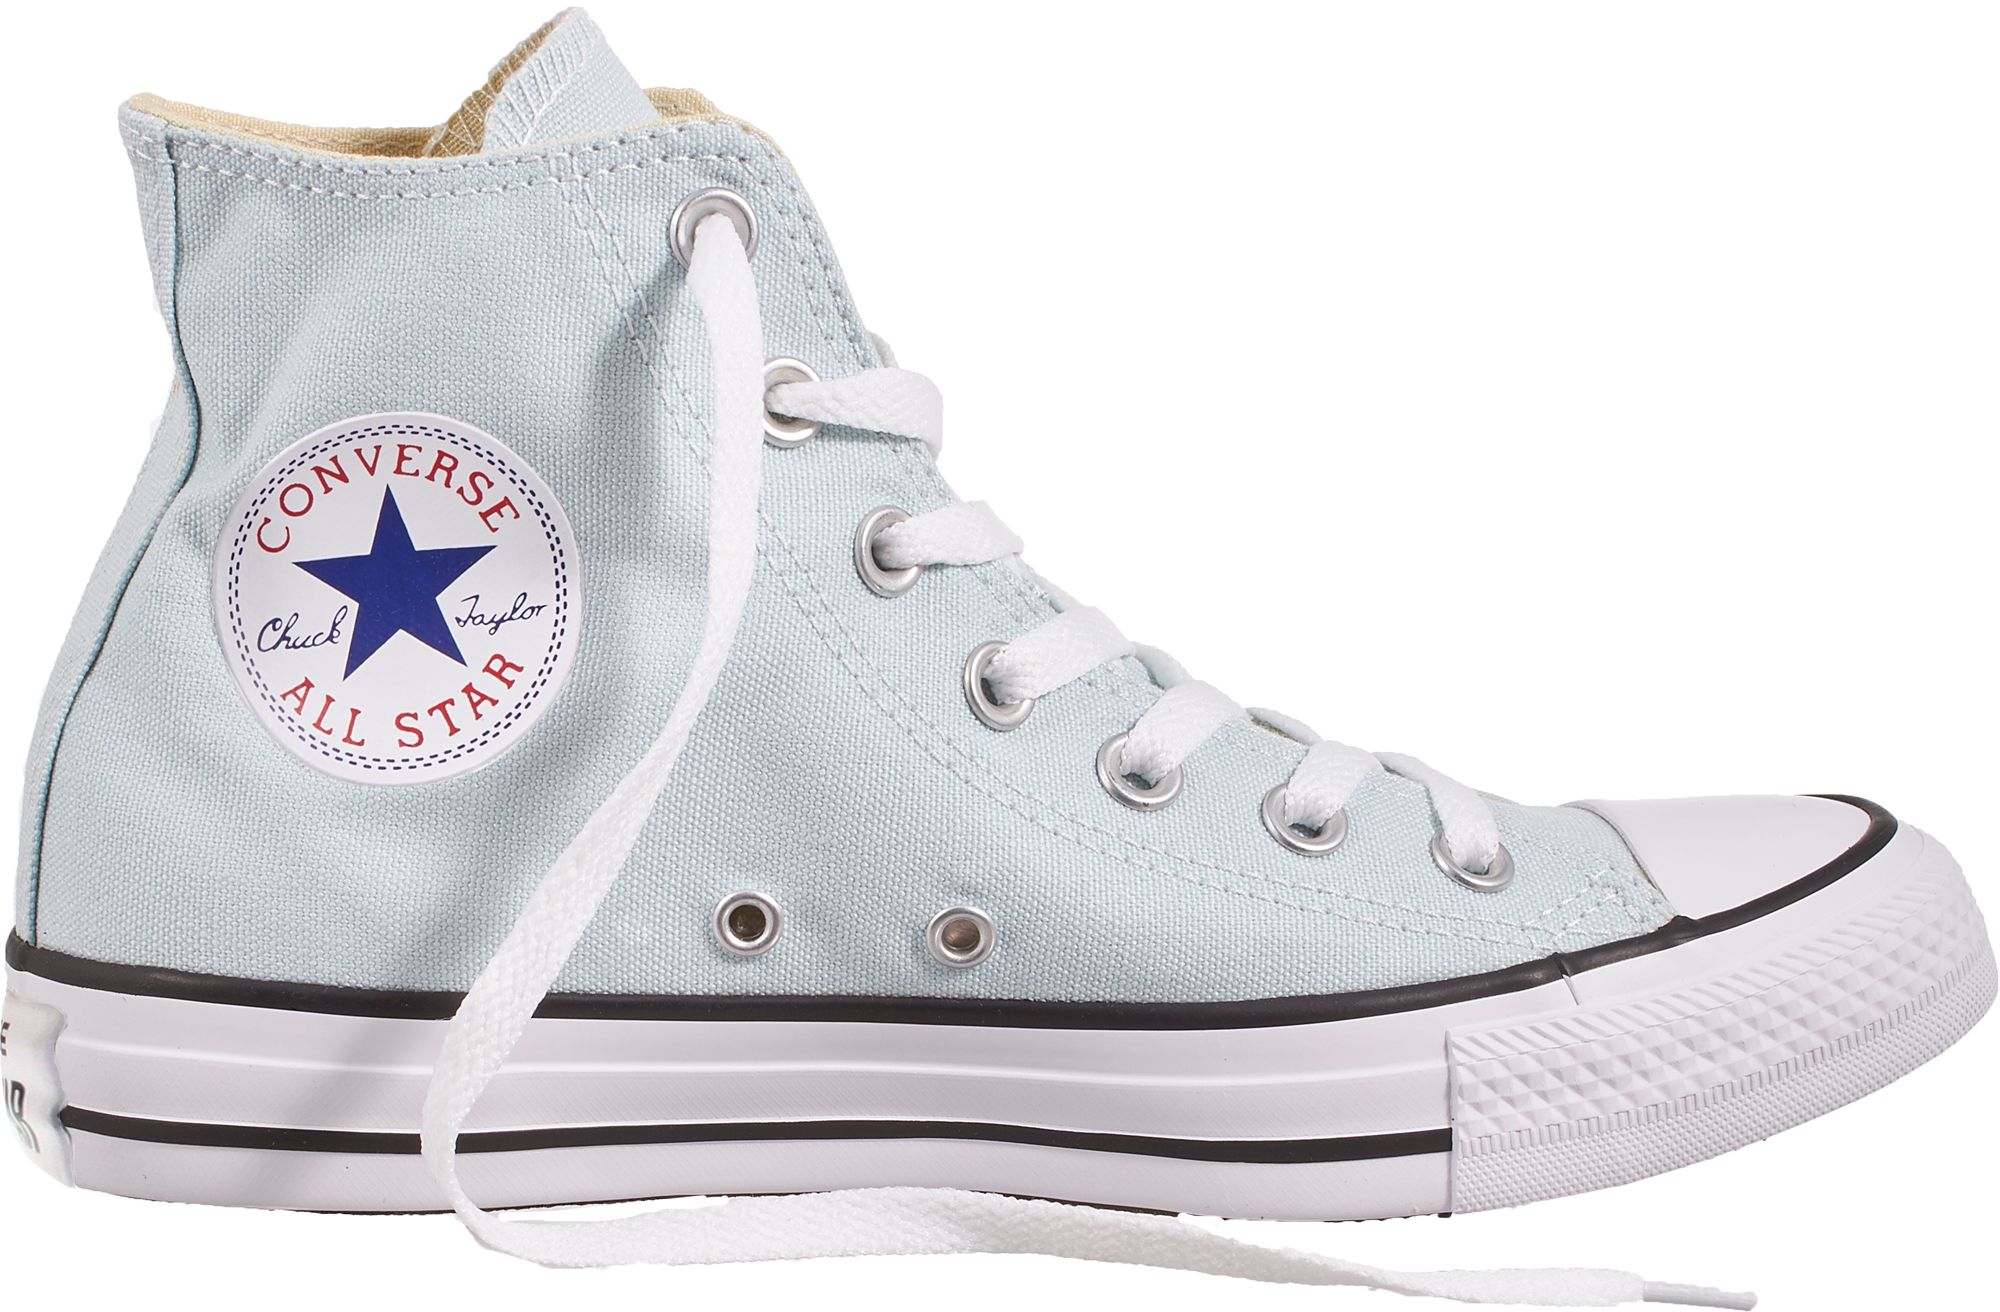 converse all star high top shoes